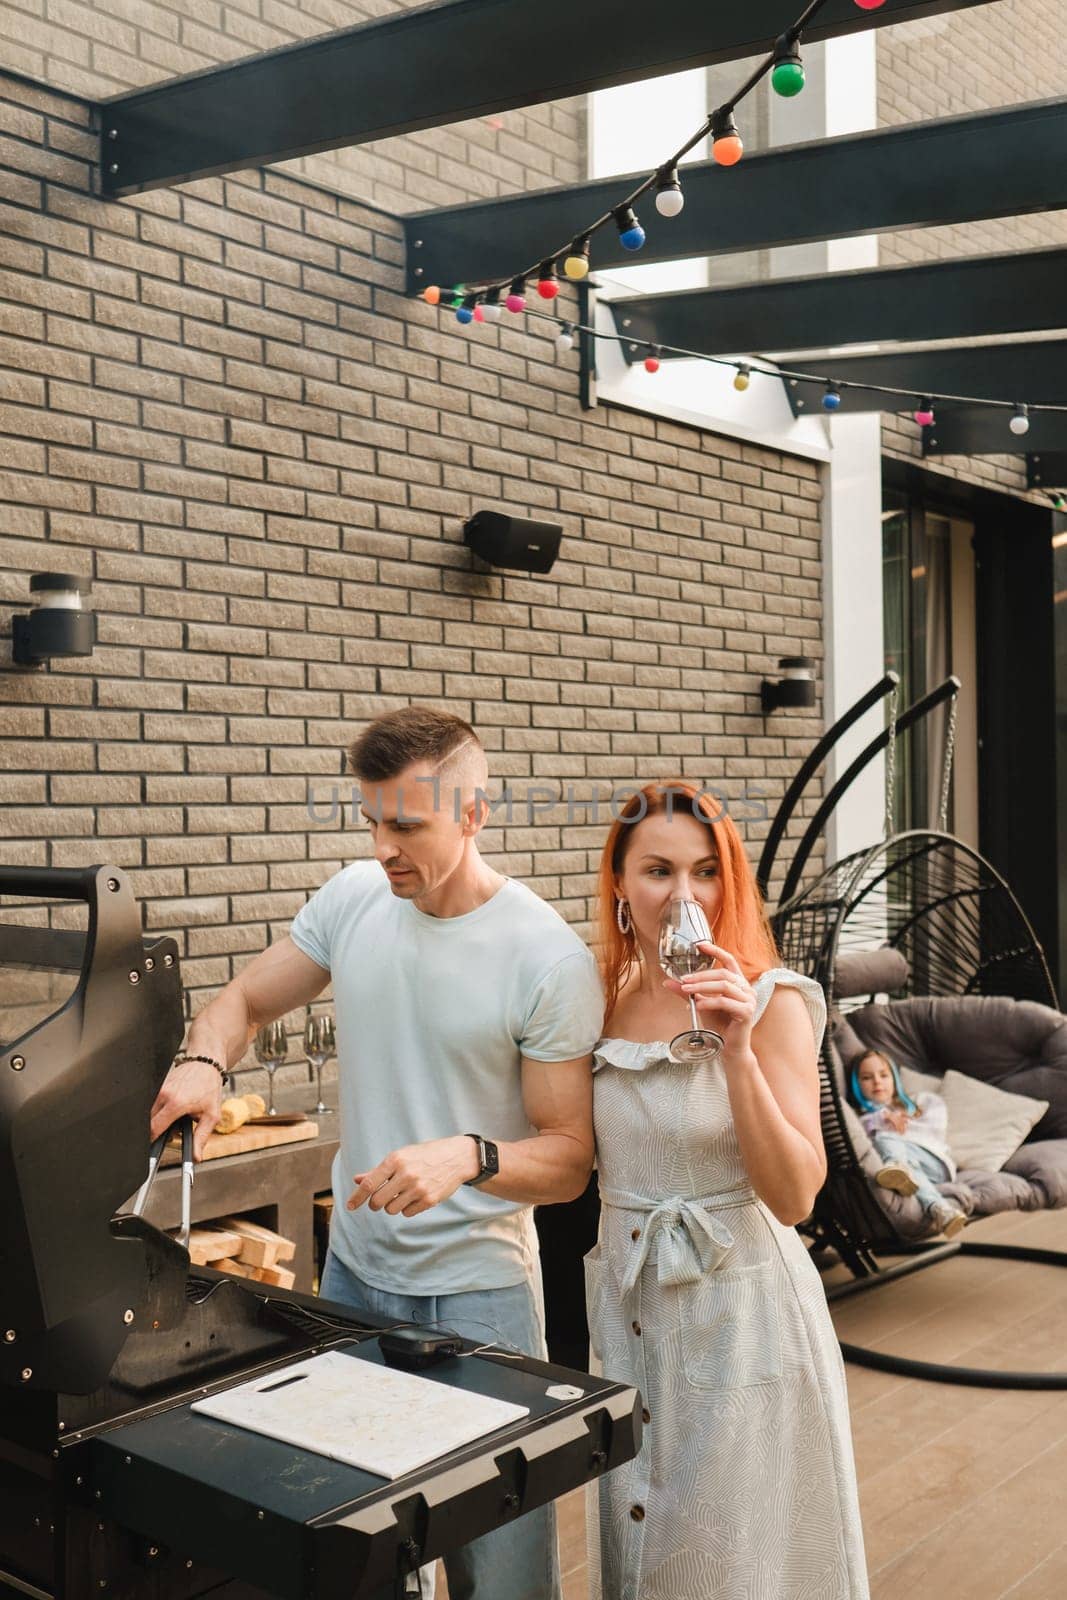 A married couple cooks grilled meat together on their terrace.